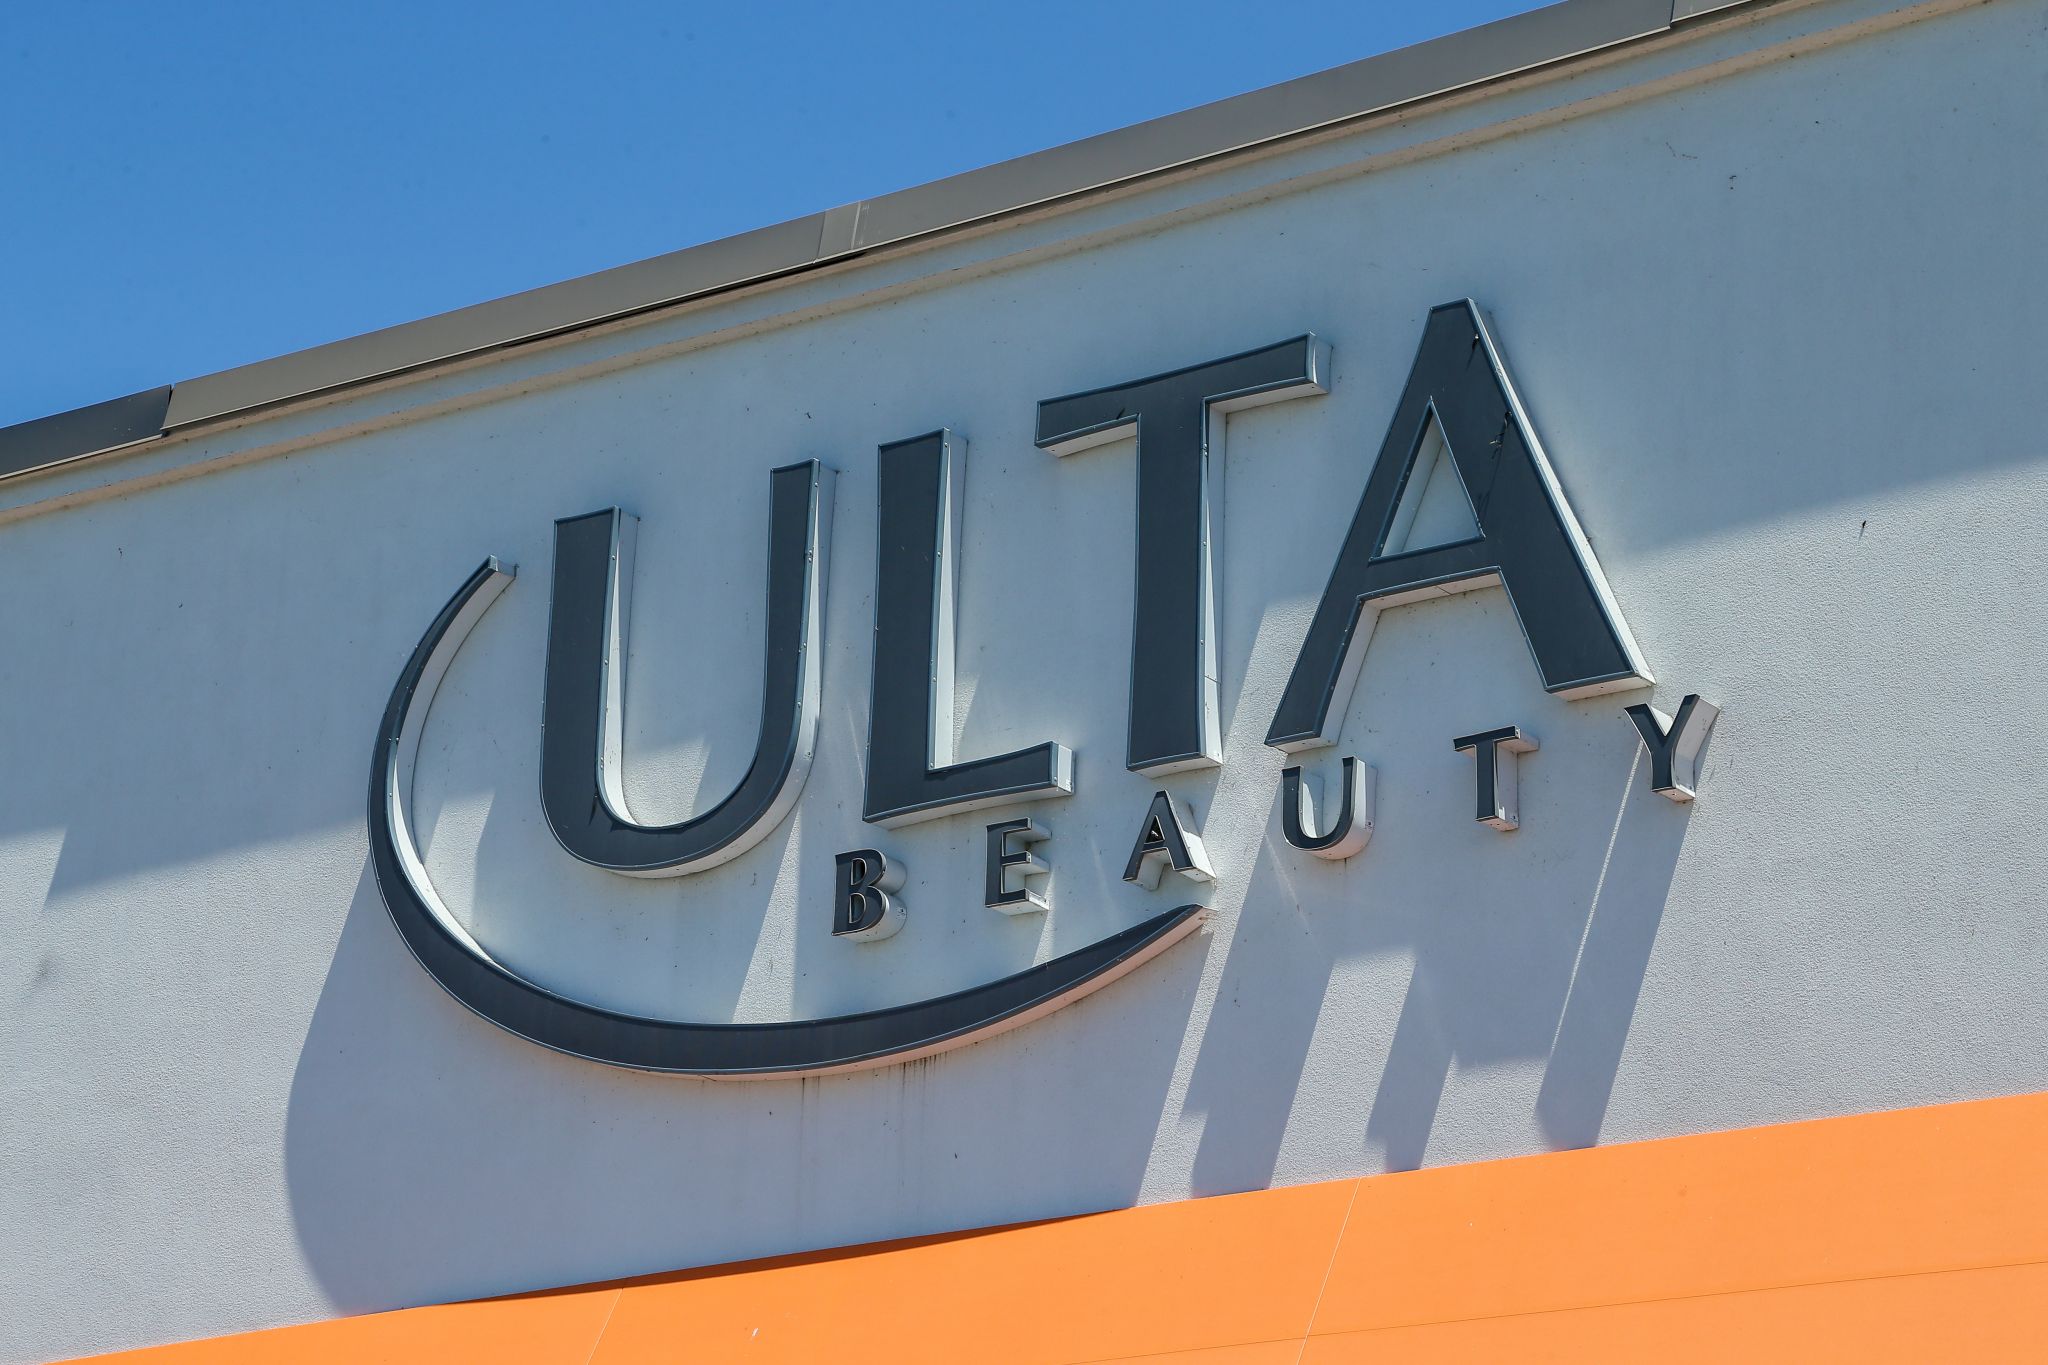 Man and woman accused of stealing $3,000 worth of cosmetics from North Side Ulta Beauty